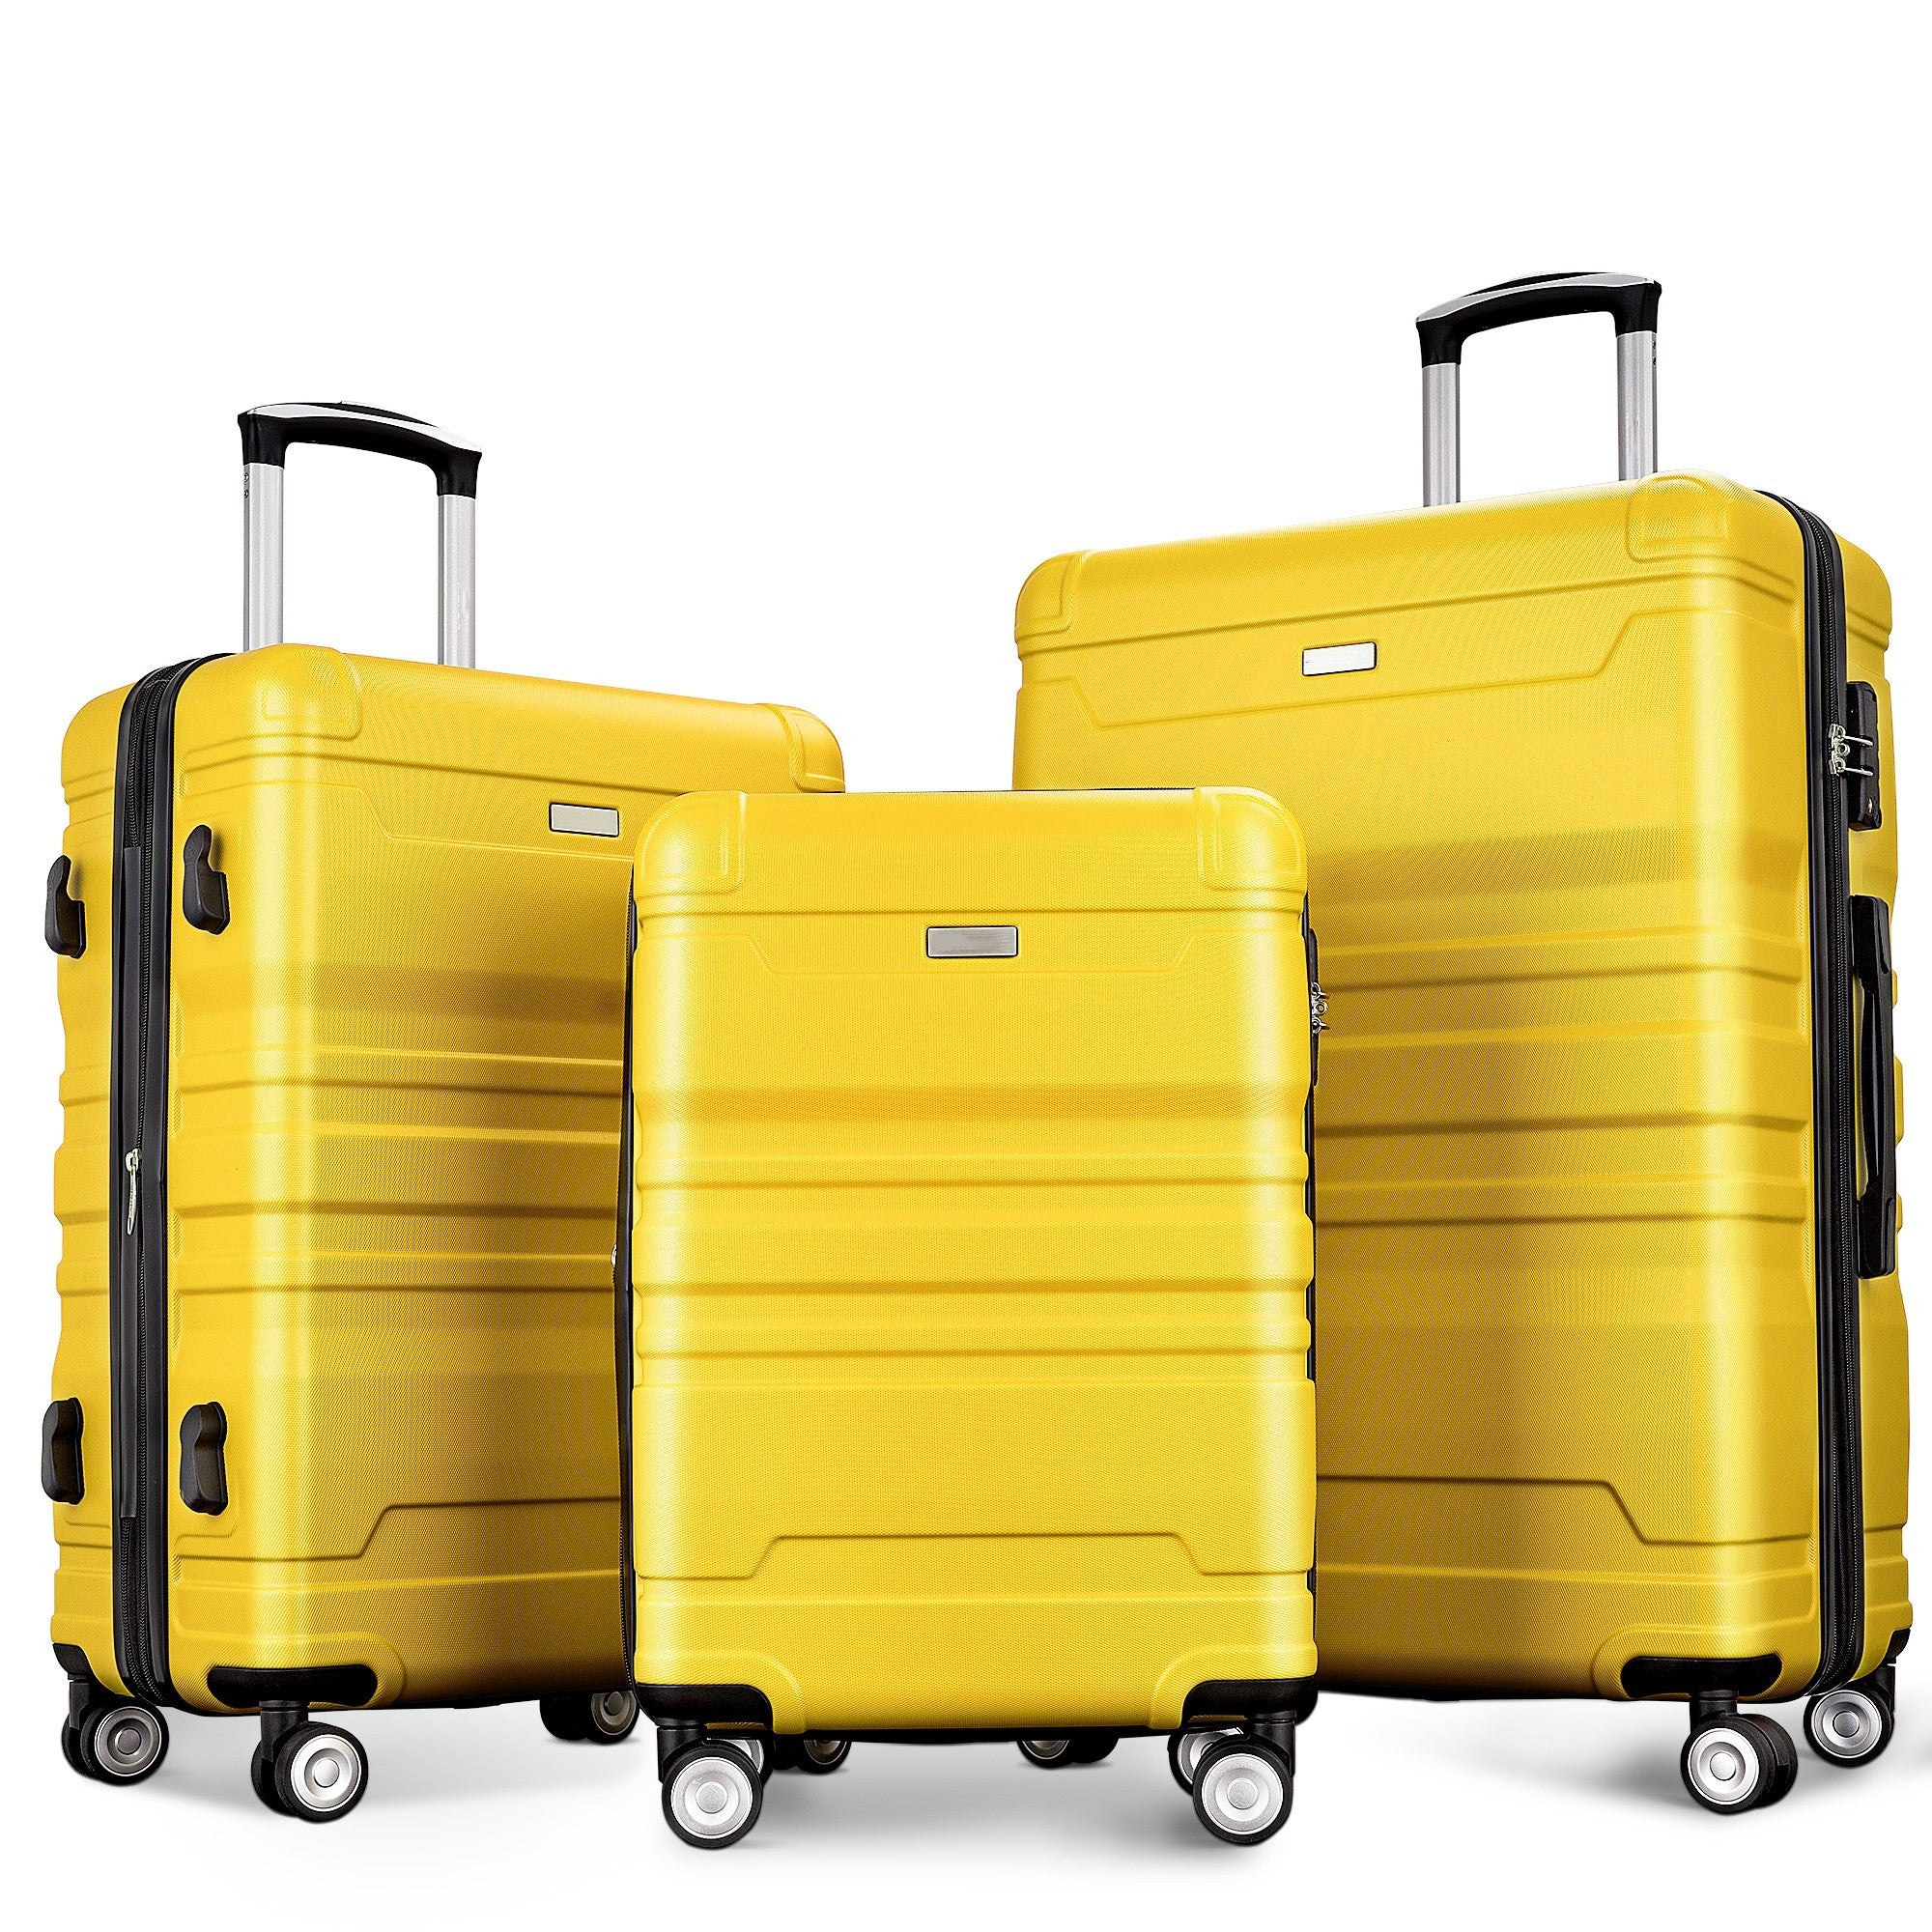 Luggage Sets Model Expandable ABS Hardshell 3pcs yellow-abs